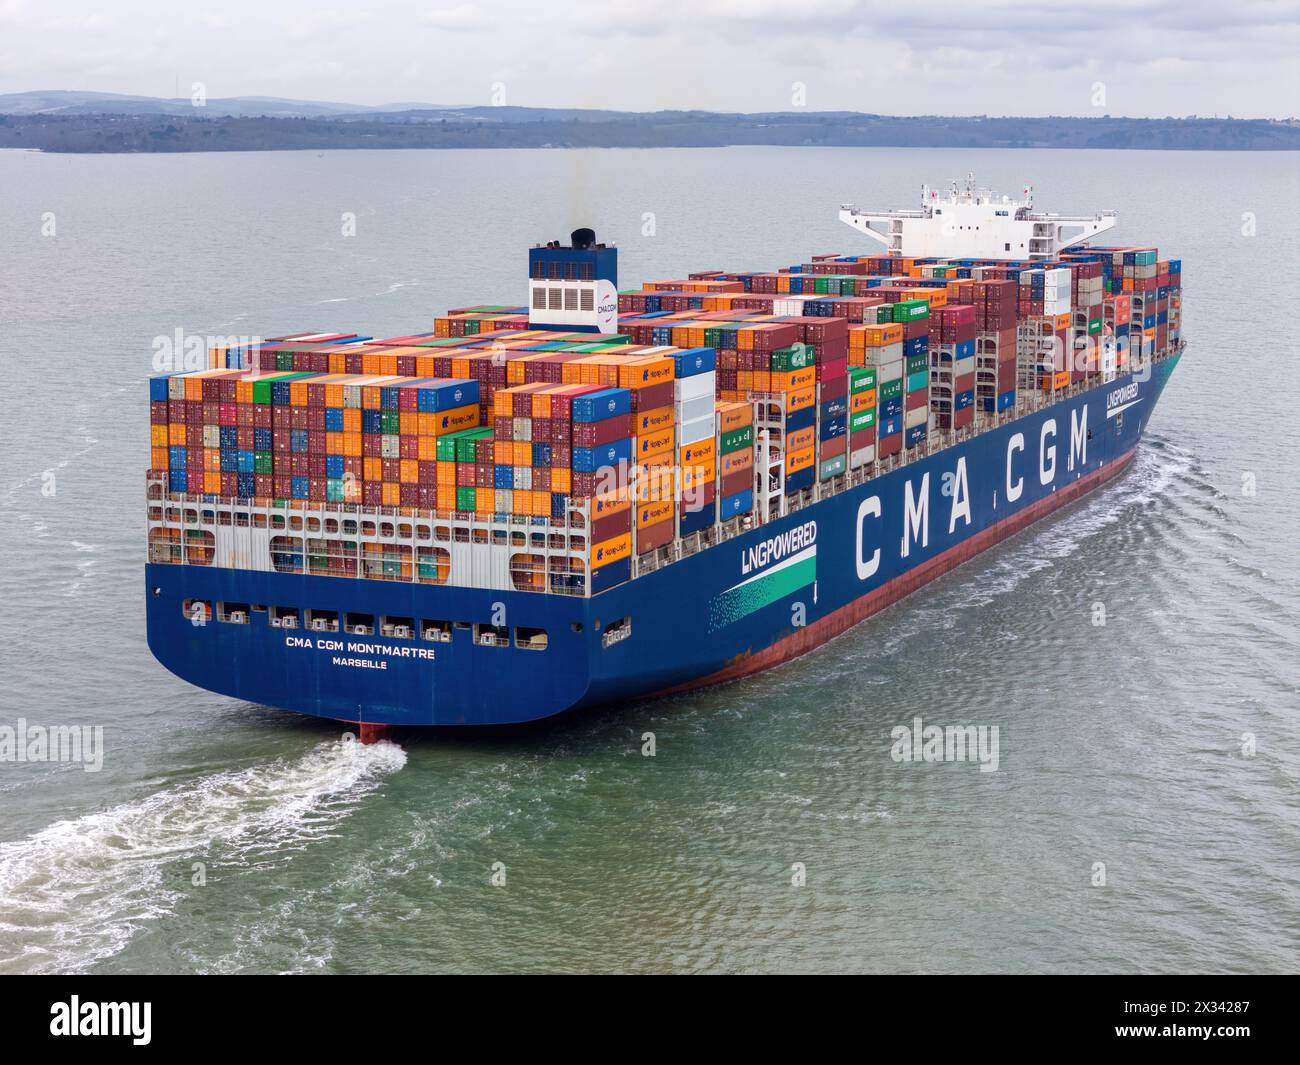 An aerial view of the LNG-powered Ultra Large container ship CMA CGM Montmatre underway. Stock Photo